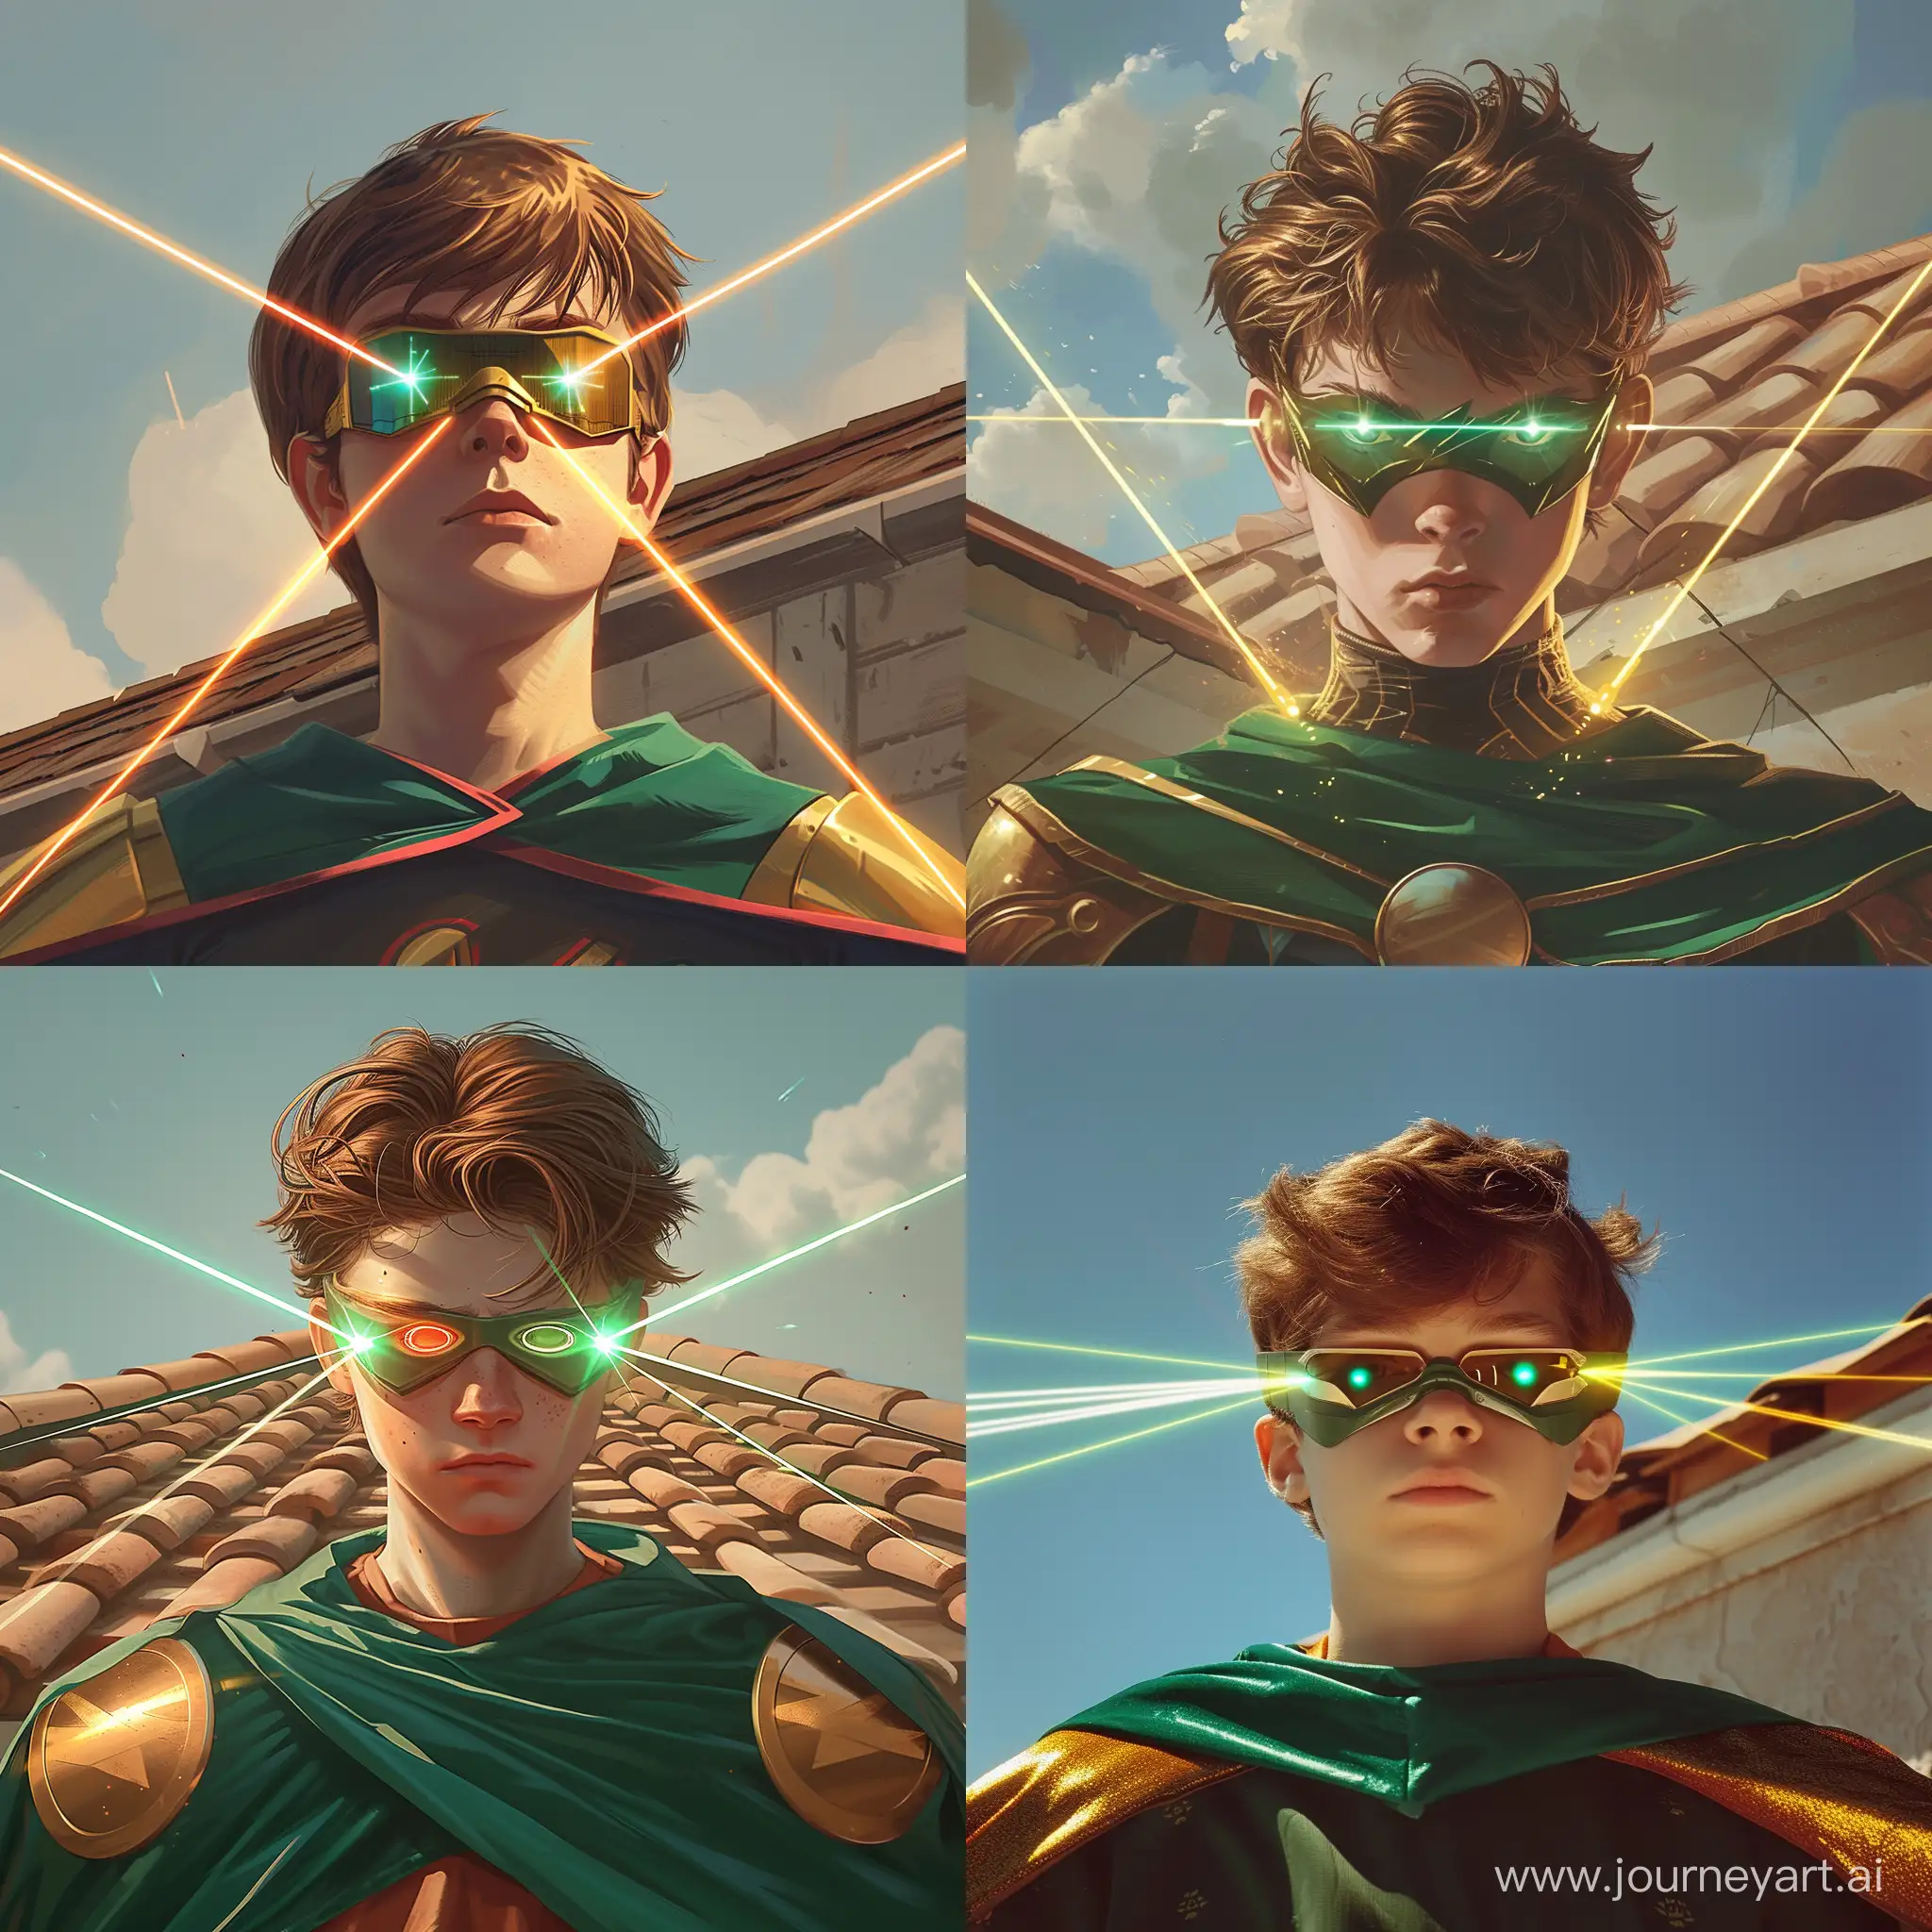 Superhero-Teen-with-Brown-Hair-and-Green-Cape-Shooting-Laser-Beams-from-Rooftop